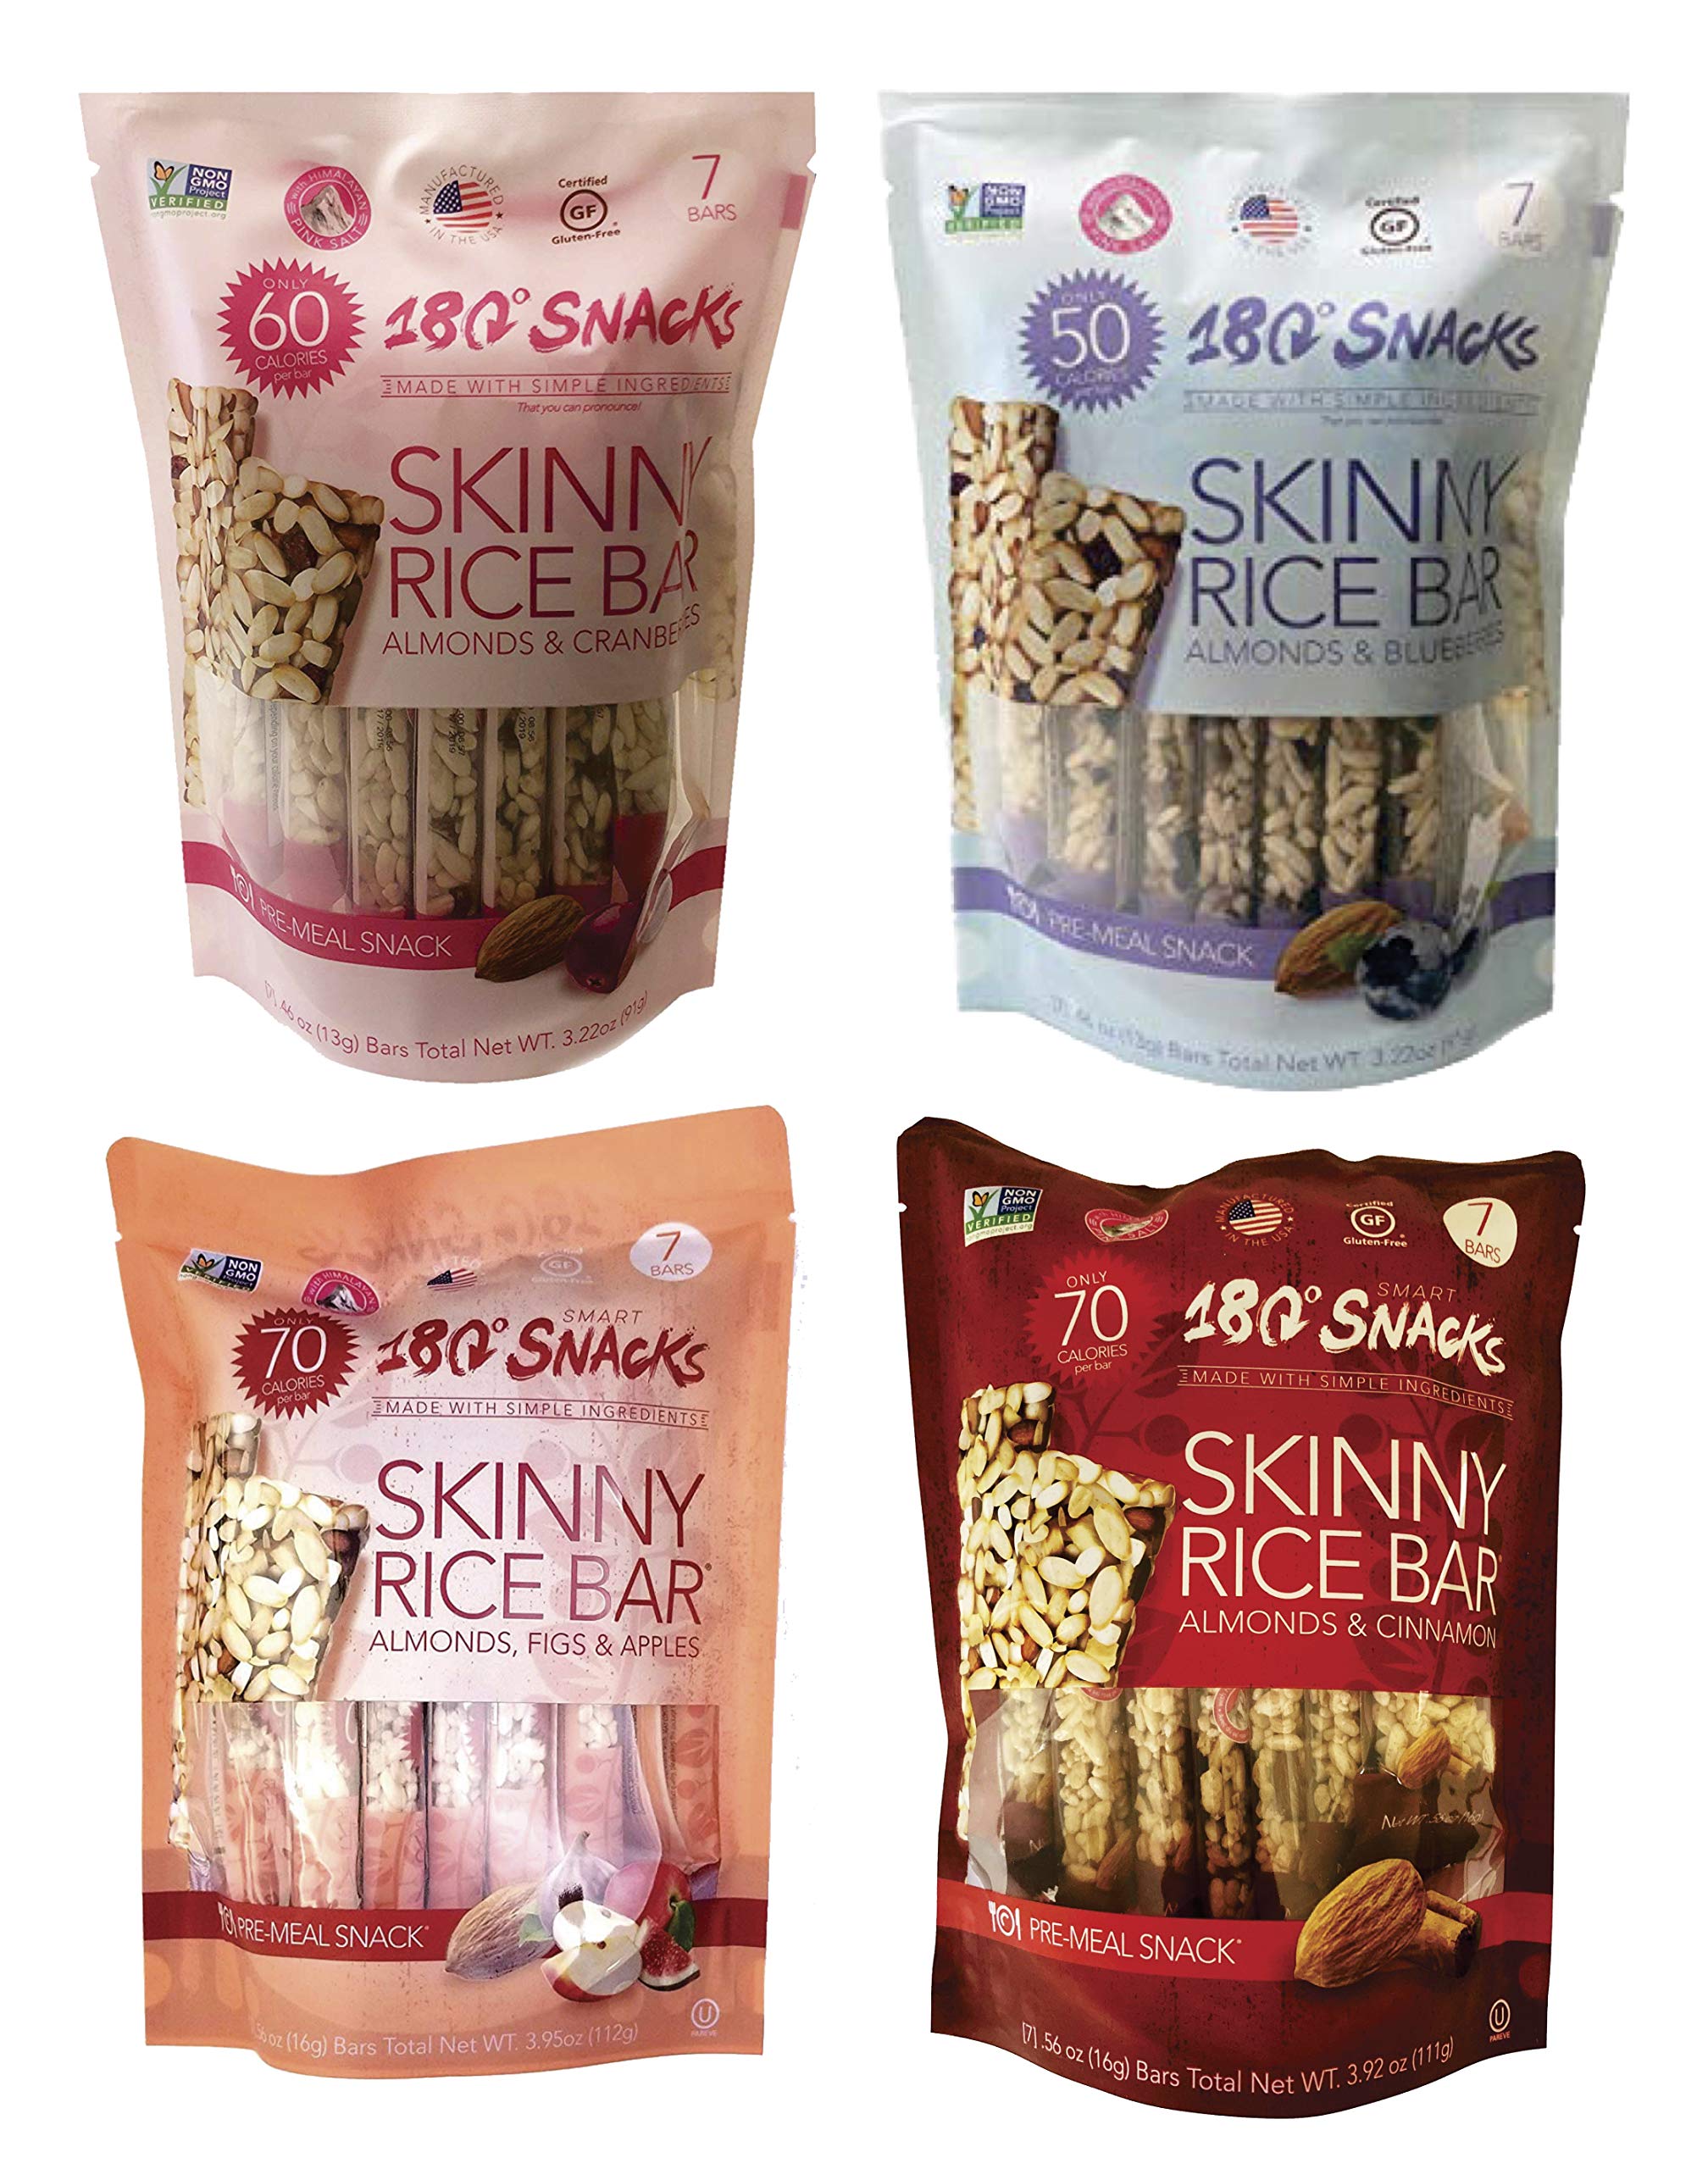 180 Snacks Skinny Rice Bars with Almonds, Cranberries and Himalayan Salt -  Low Calorie Snacks, Only 70 Calories - Non GMO, Dairy-free, Gluten-free  Snacks - EBT Eligible Snacks for Weight Loss - 7 count - Yahoo Shopping